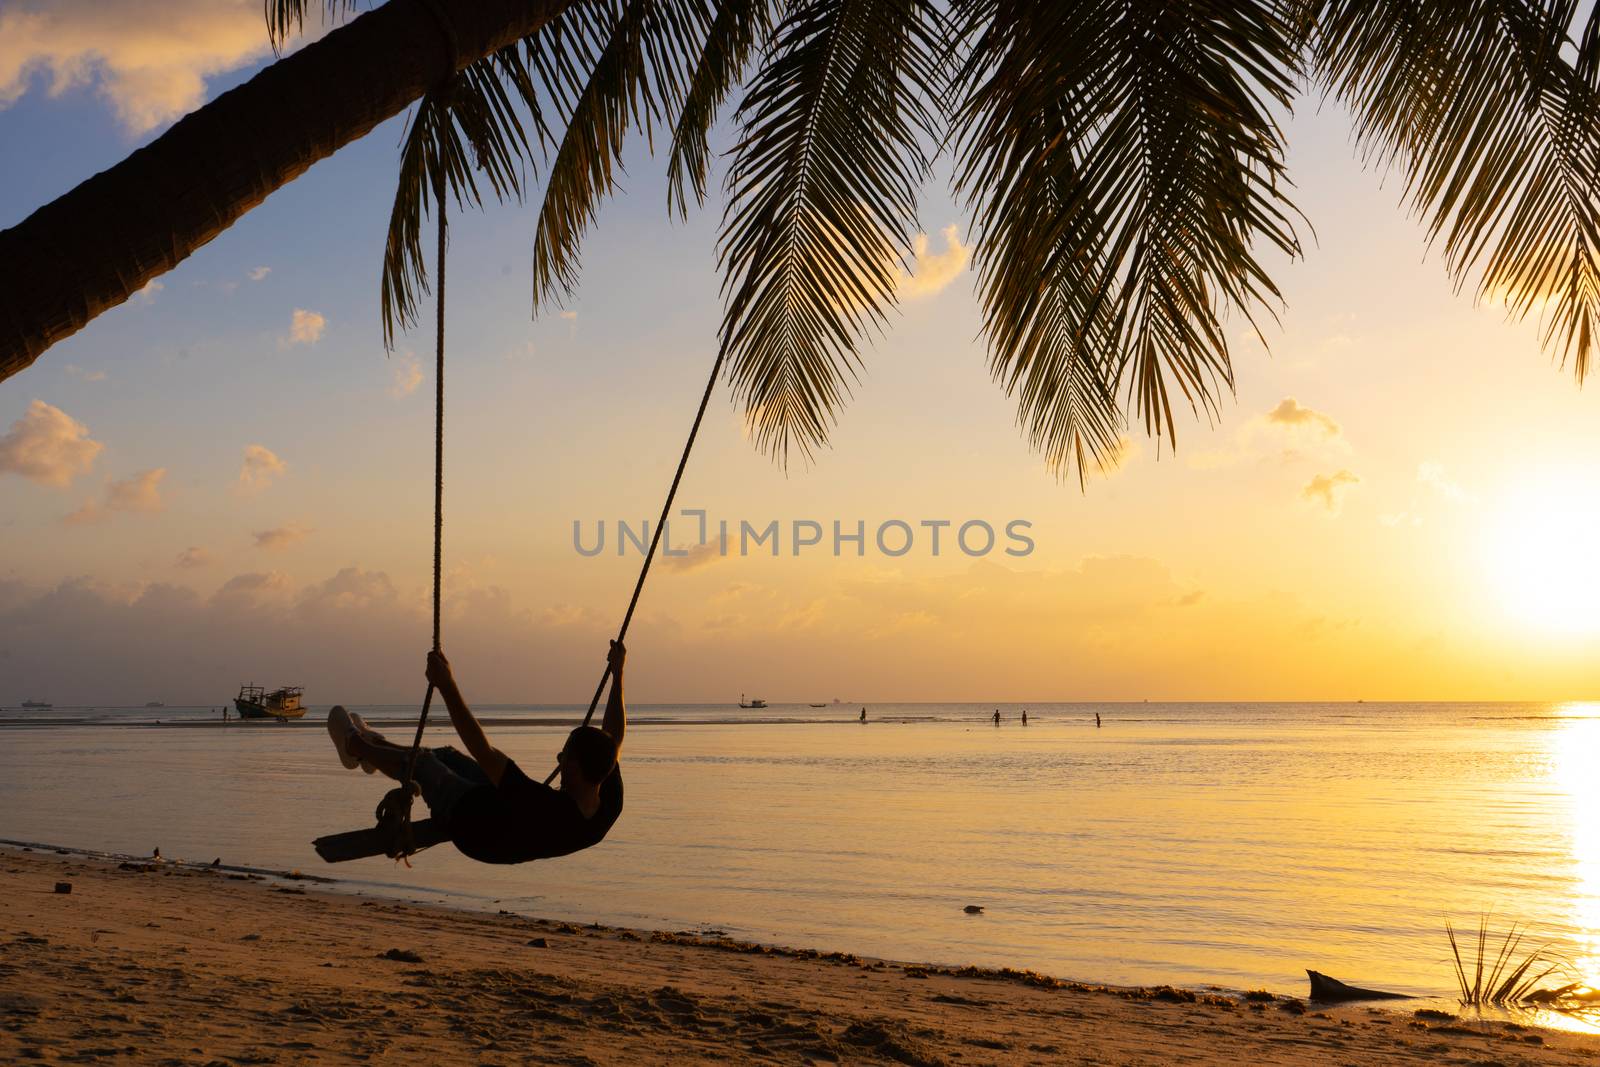 The guy enjoys the sunset riding on a swing on the ptropical beach. Silhouettes of a guy on a swing hanging on a palm tree, watching the sunset in the water. by Try_my_best